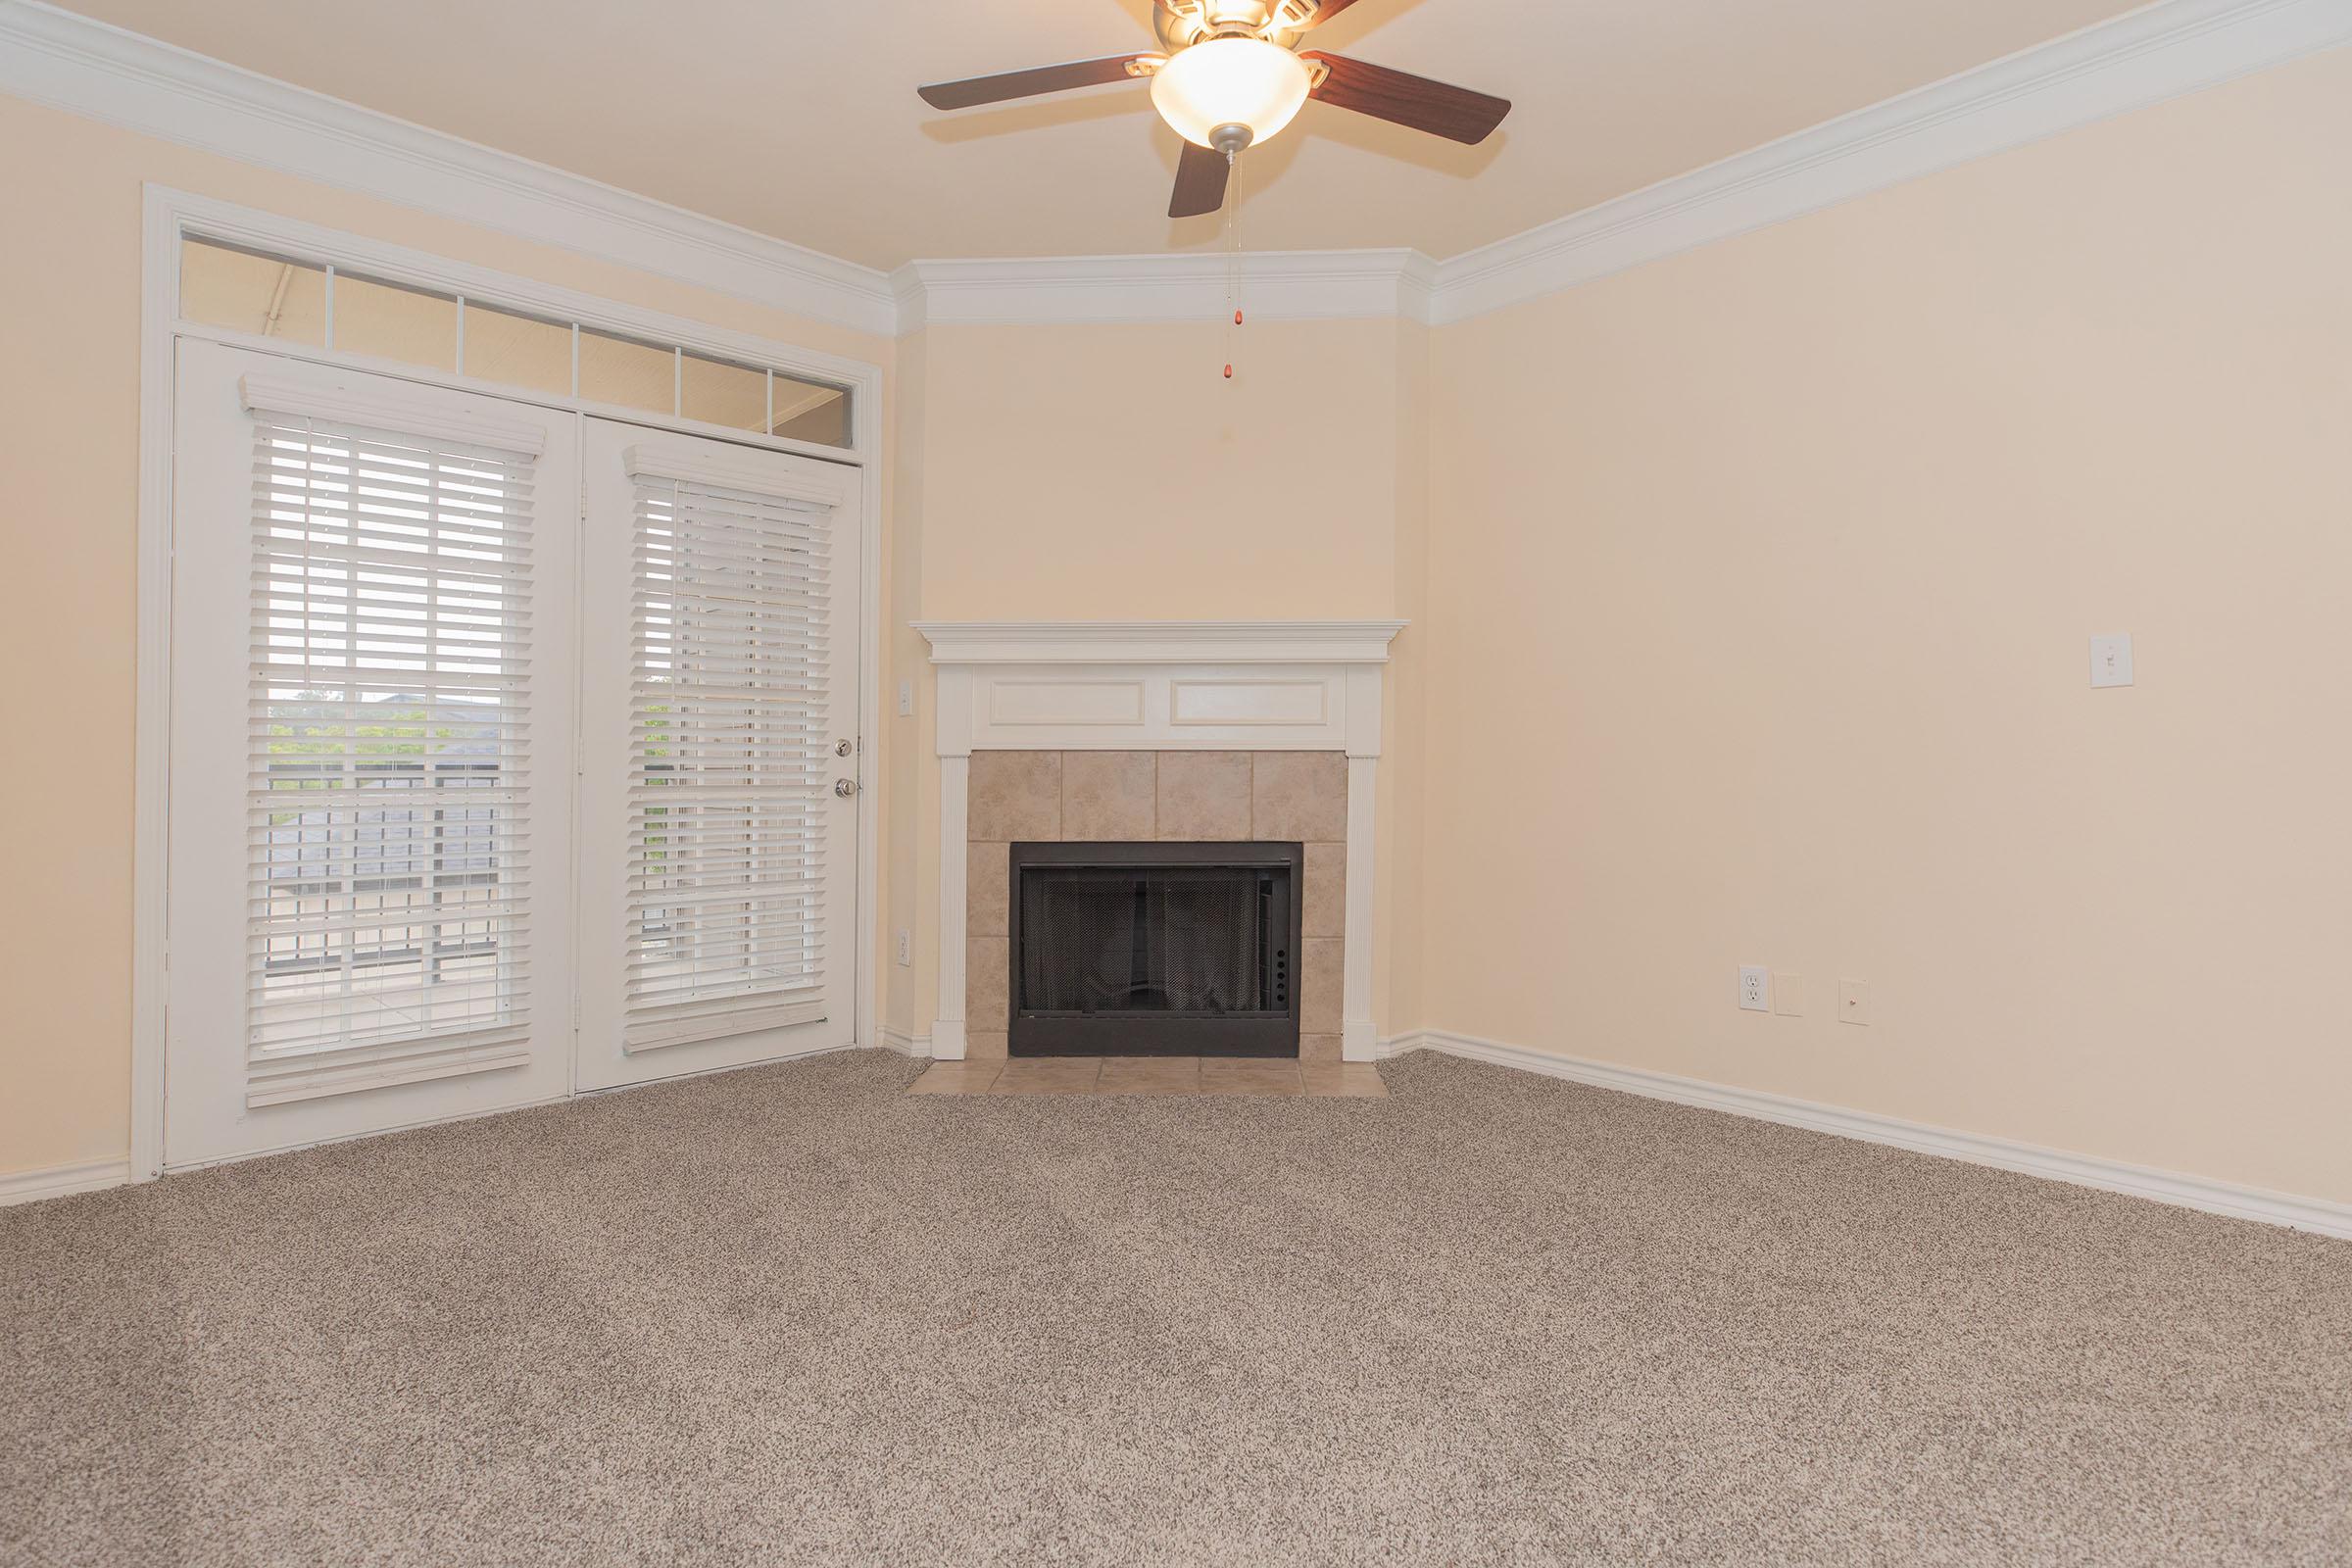 vacant living room with a fireplace